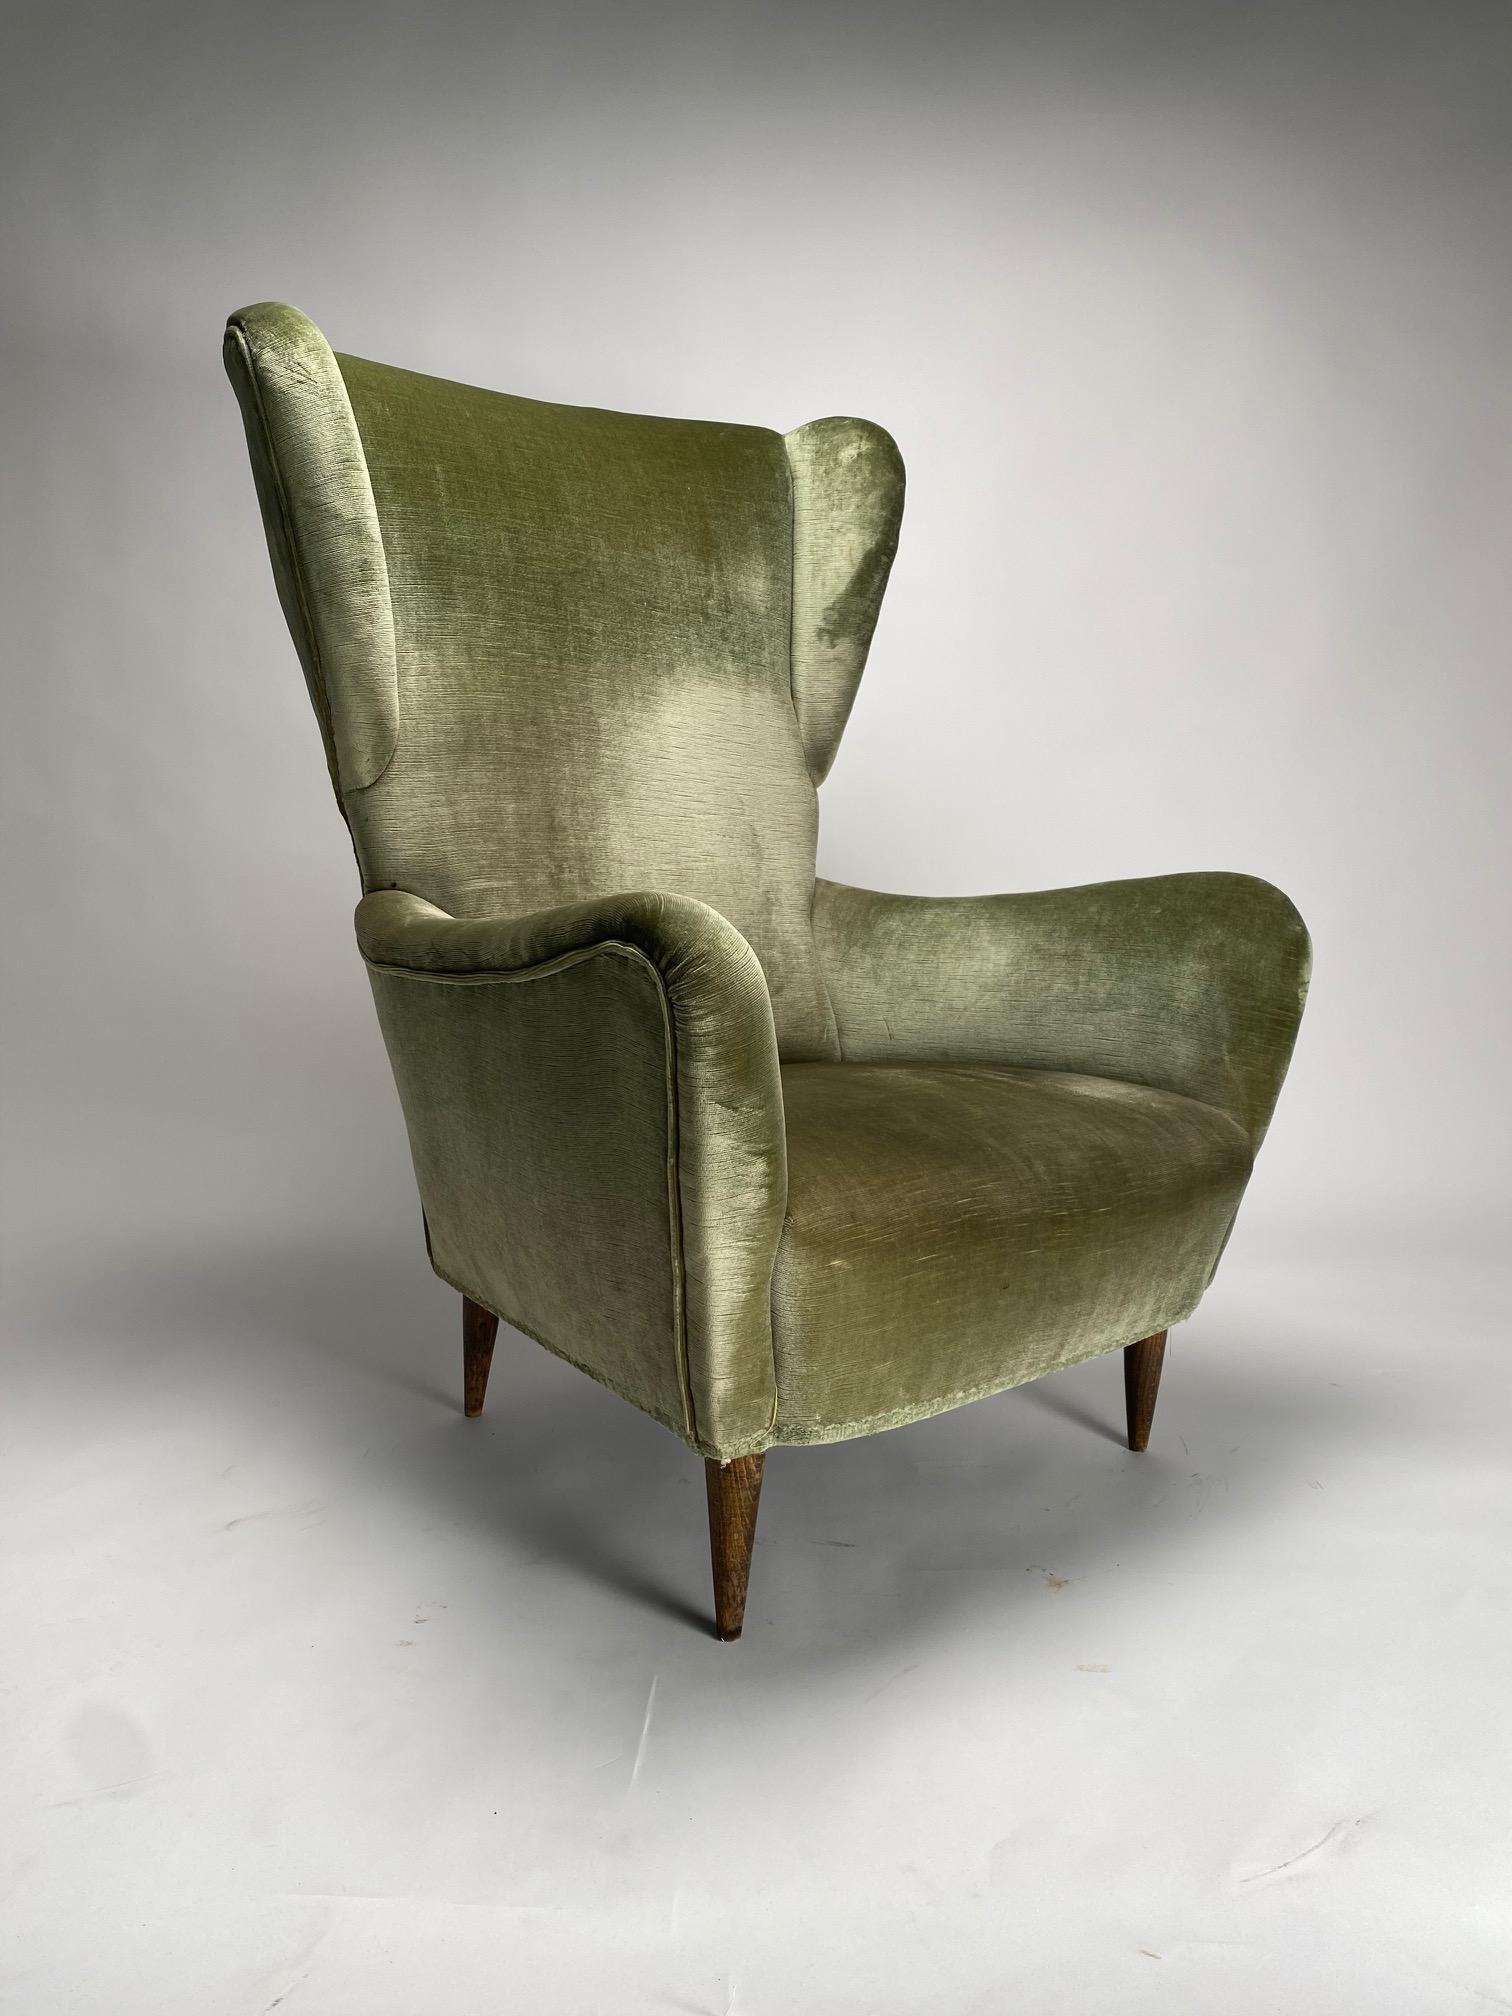 Rare pair of Italian armchairs from the 1950s, in the style of the great architect and designer Gio Ponti. The line is elegant and refined, a bergere model, which is characterized by the large lateral 